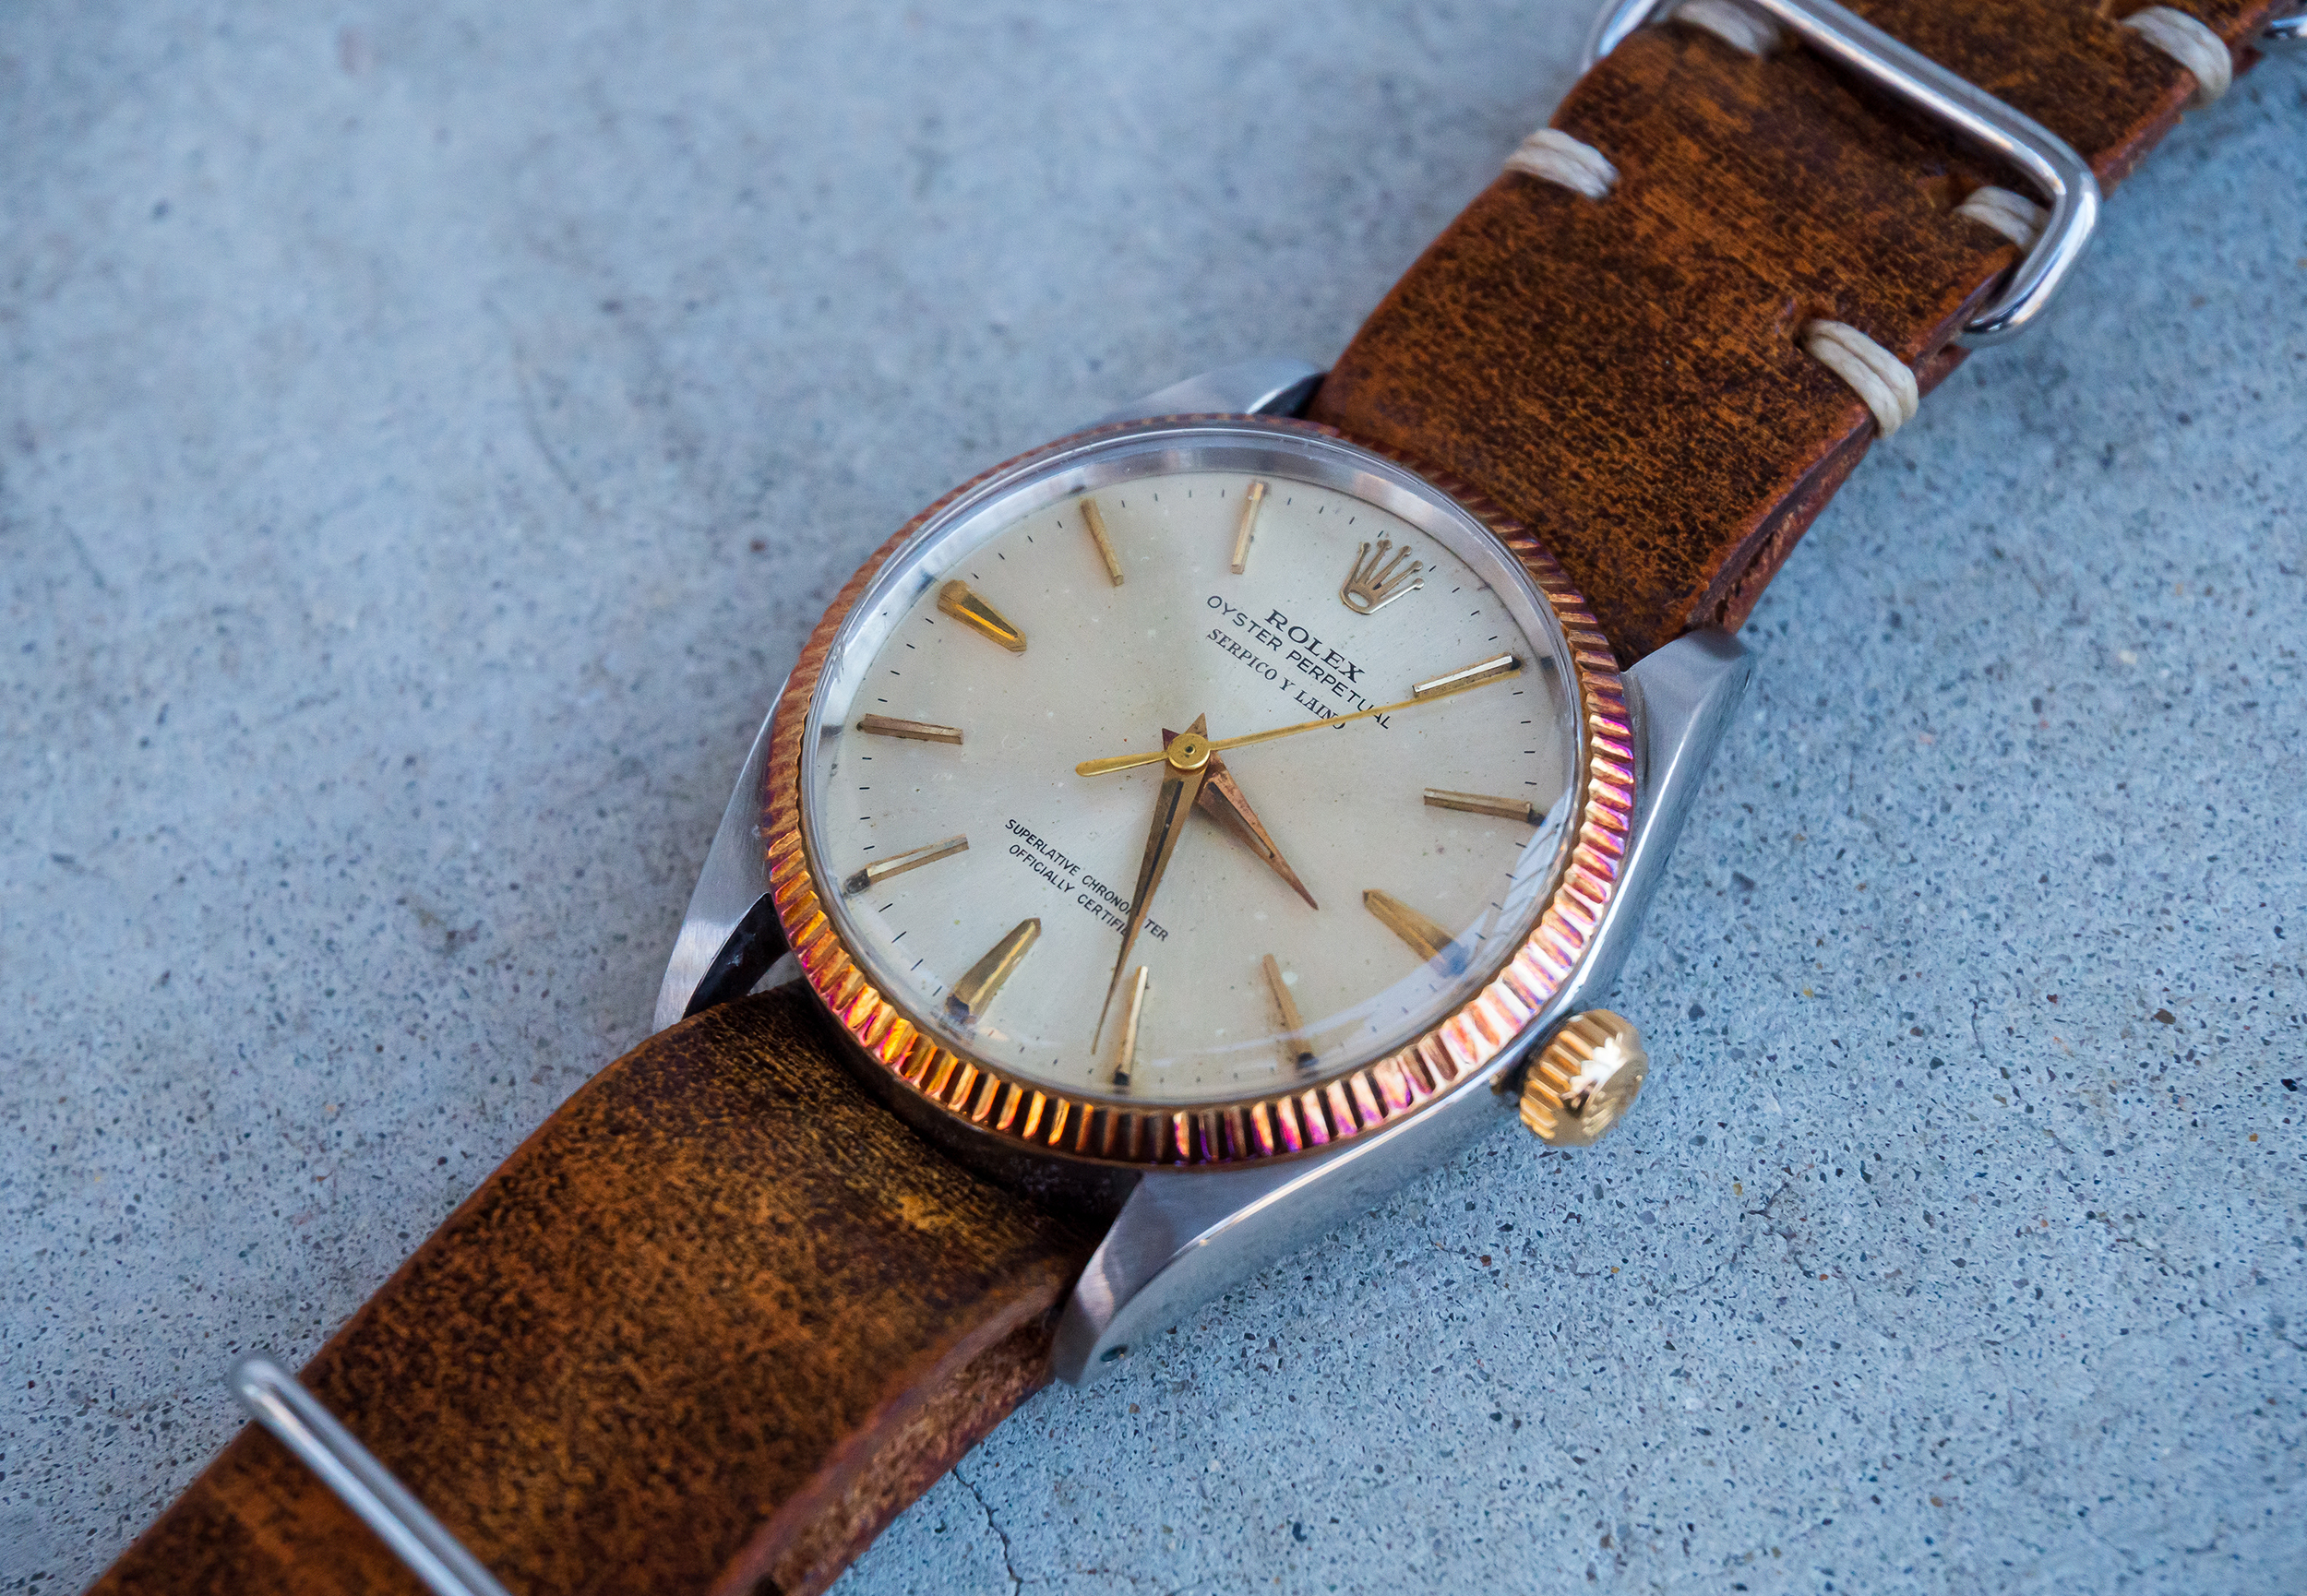 1964 Rolex Ref. 1005 - Two Brands are 